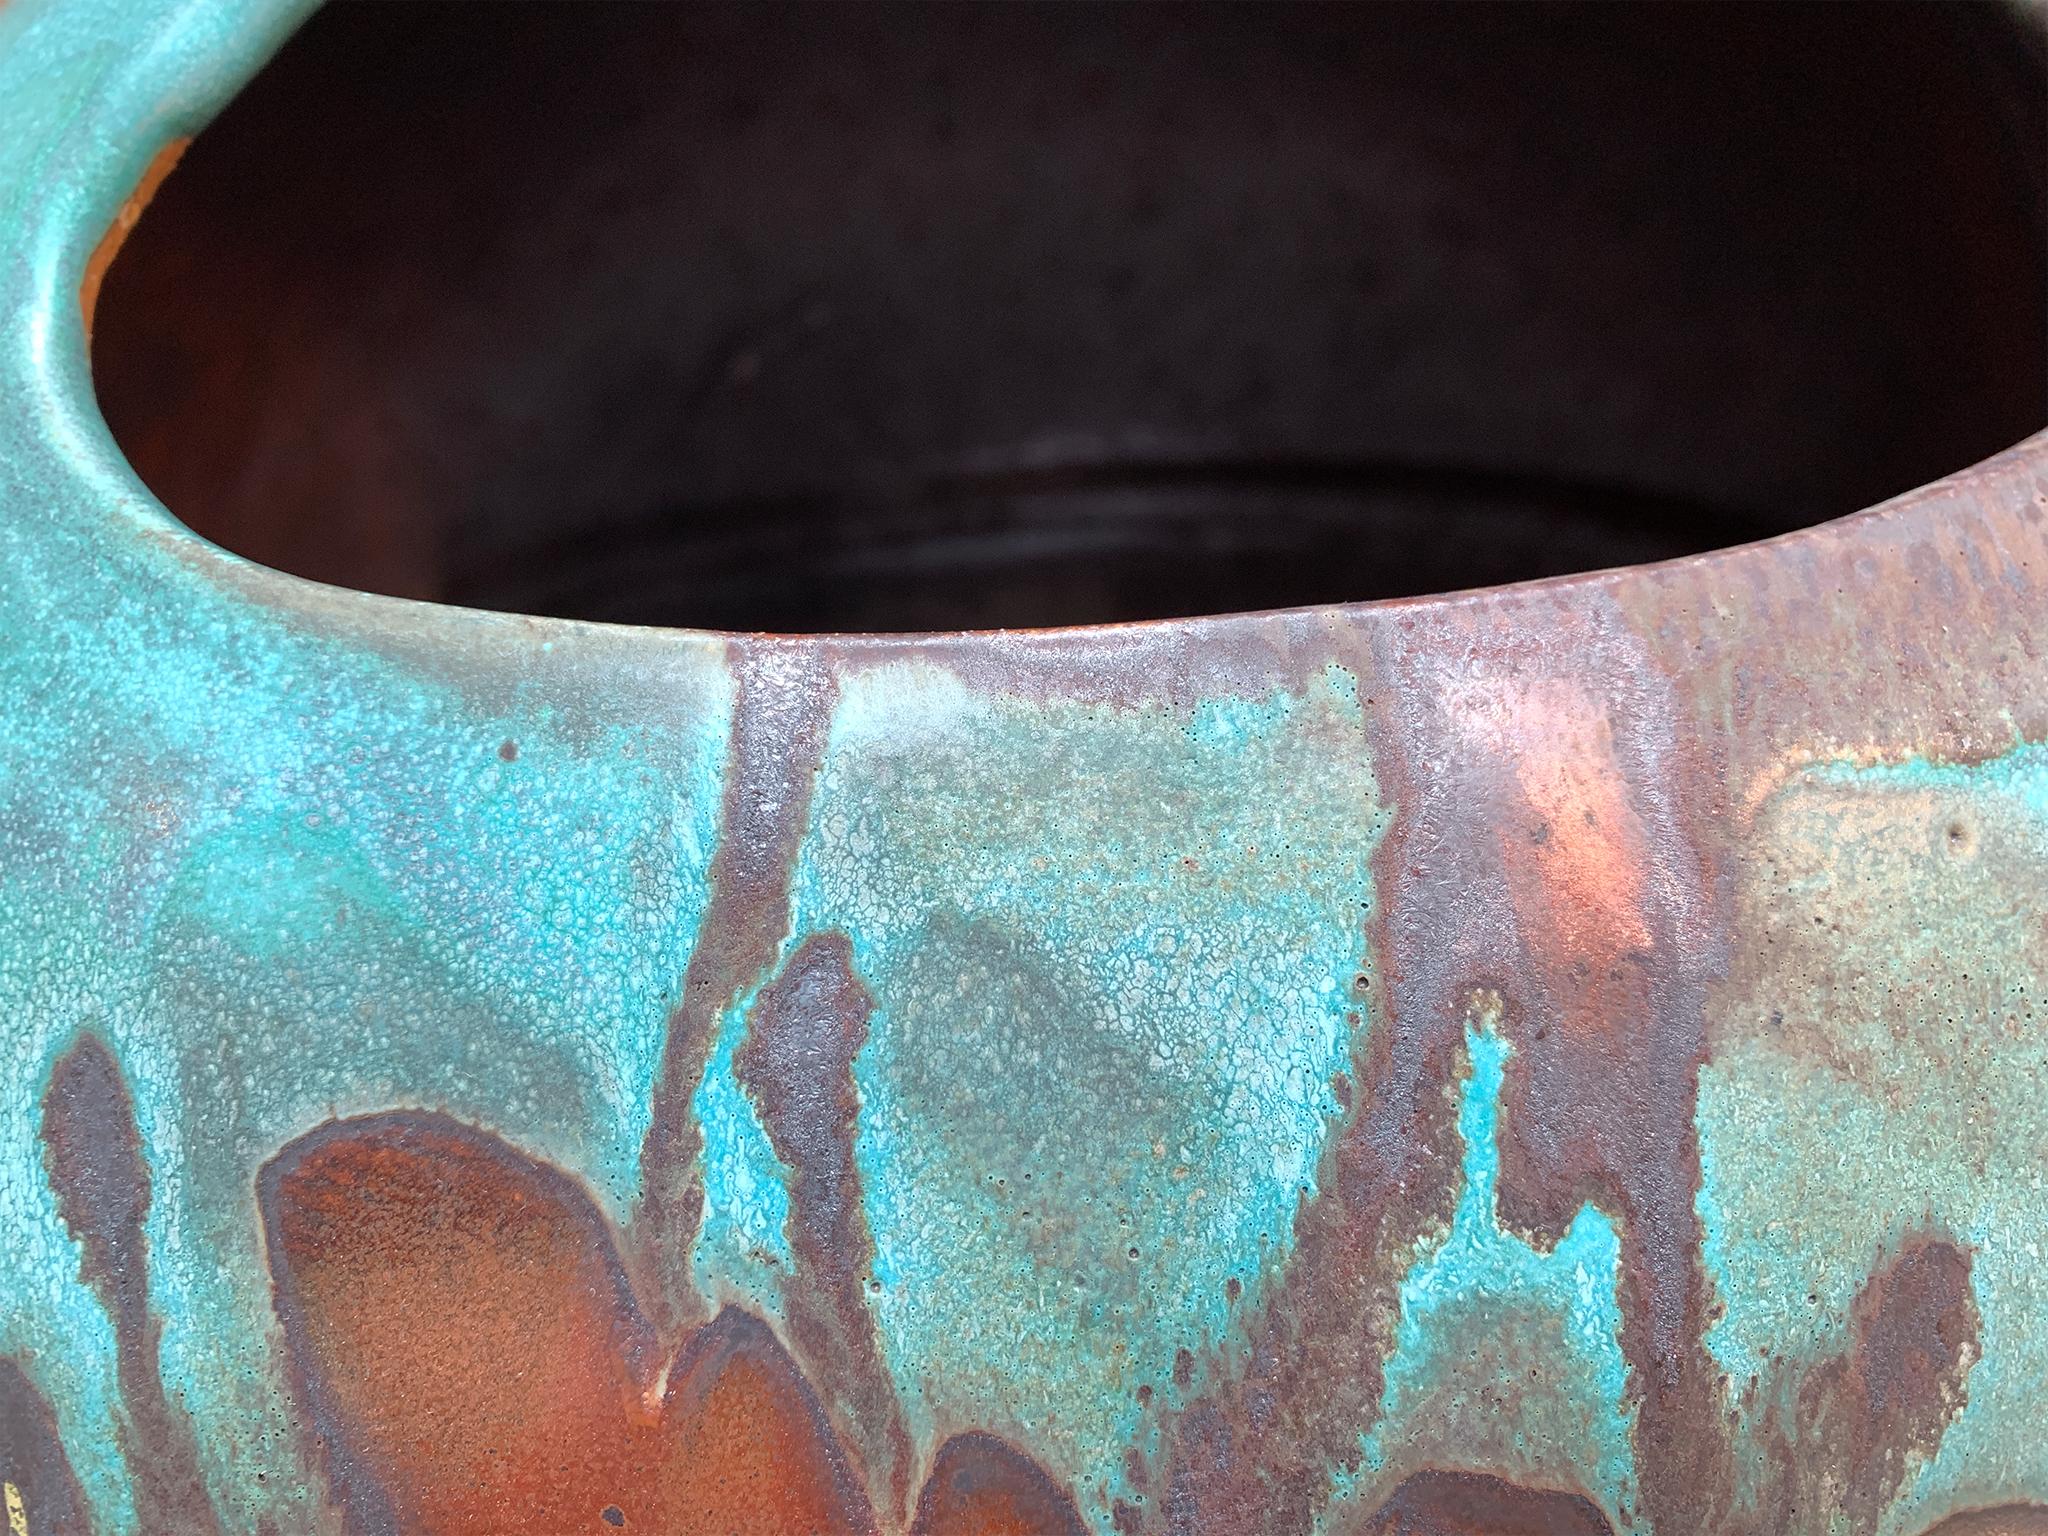 Thom Lussier Ceramic Vessel #3 - From the Oxidized Copper Collection For Sale 3